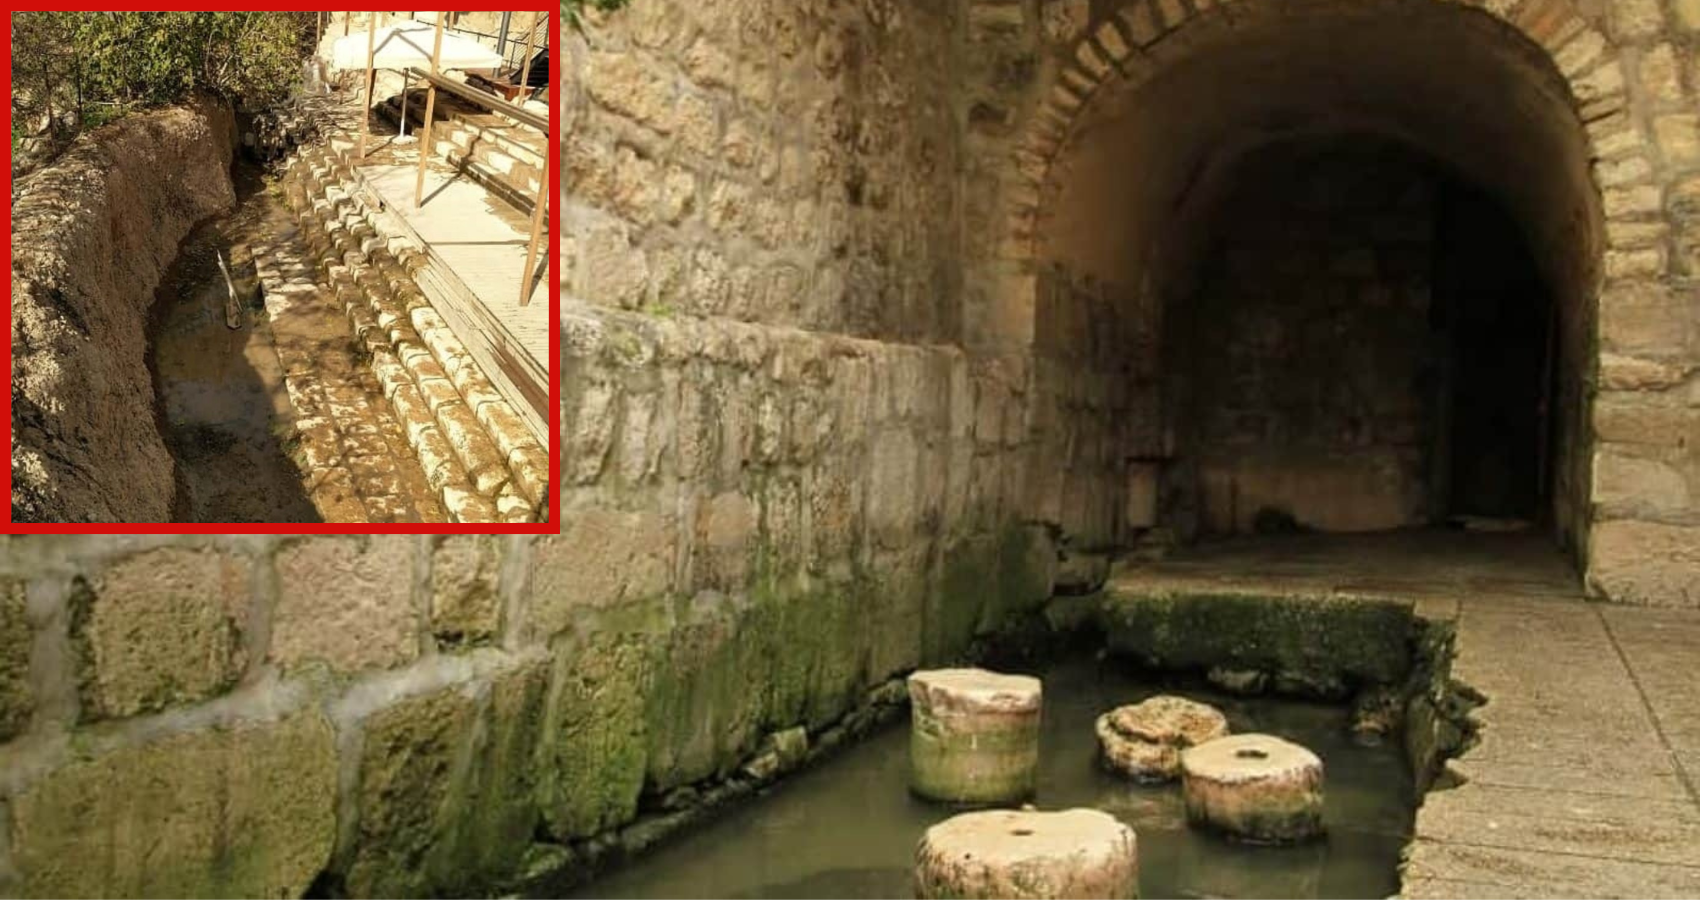 Pool of Siloam to Open in Jerusalem After 2,000 Years